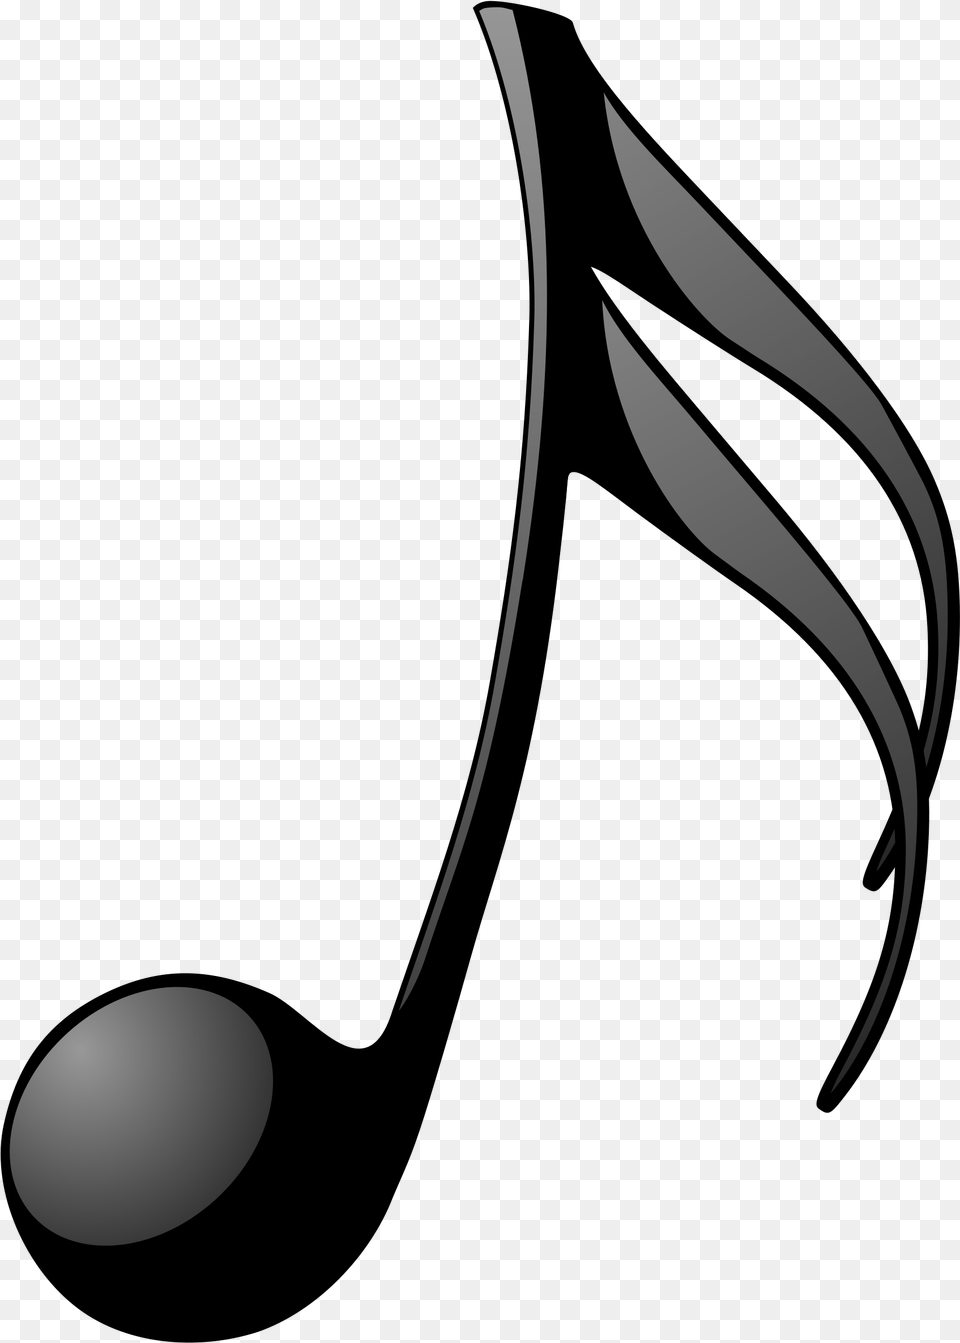 Music Notes Note Music Quaver Vector Graphic Pixabay Music Note Pdf, Lighting, Blade, Dagger, Knife Free Png Download